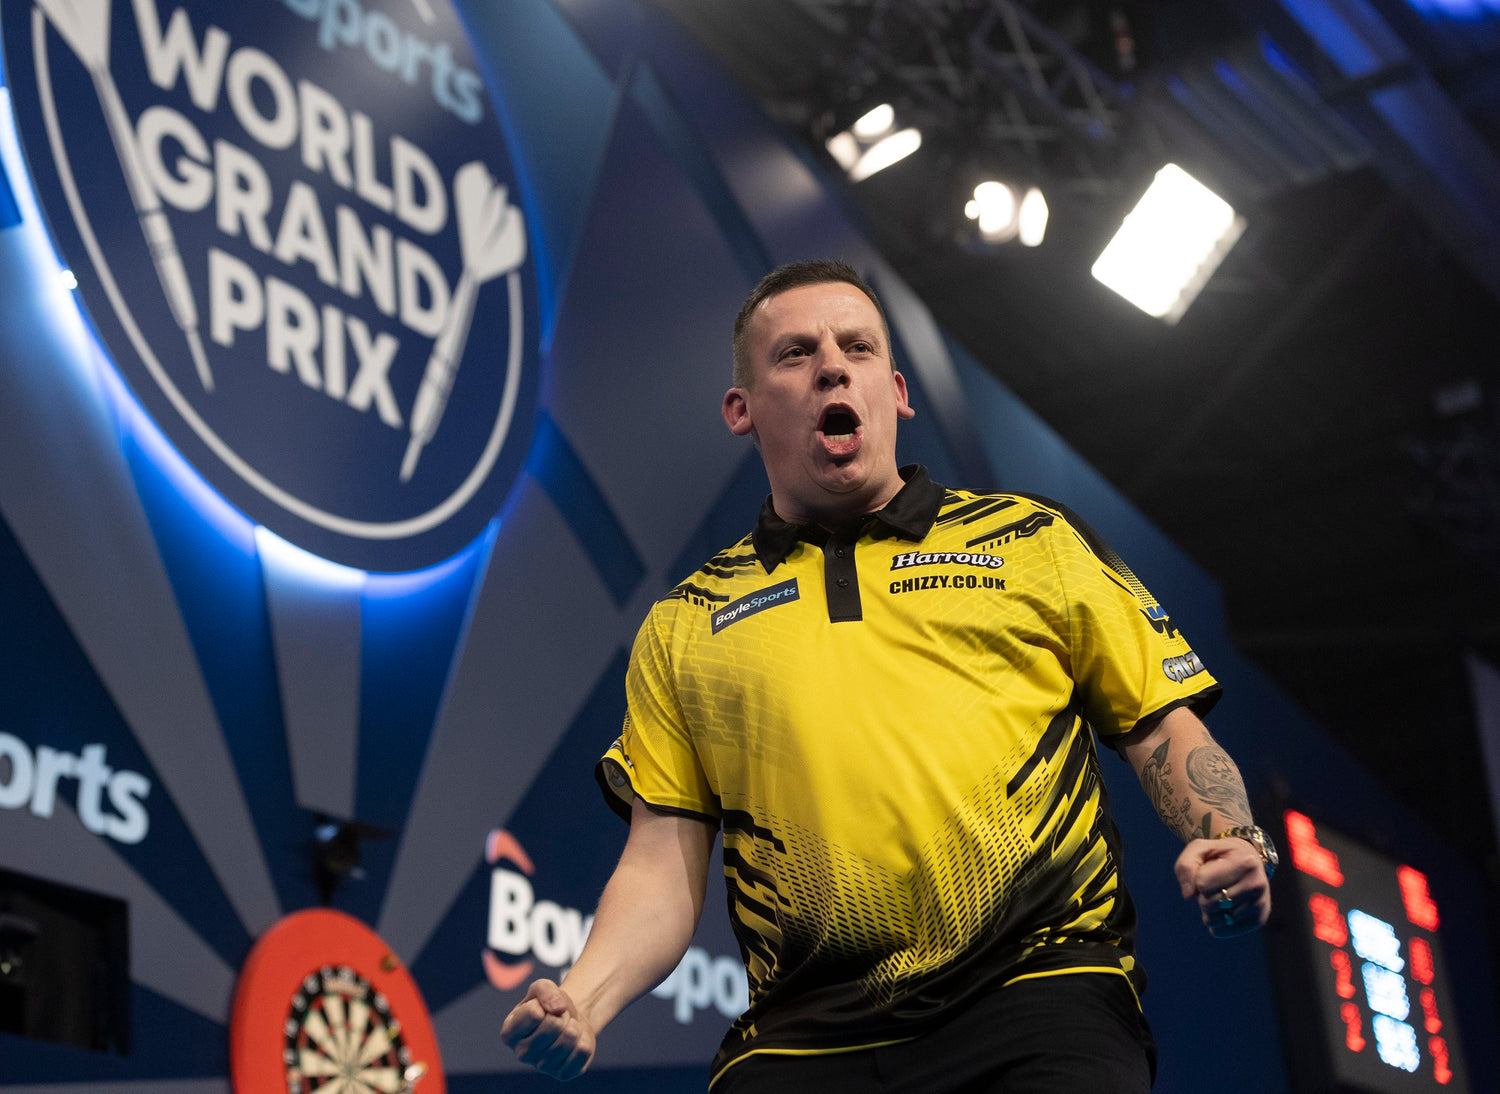 Chisnall completes remarkable fightback as Price avoids scare